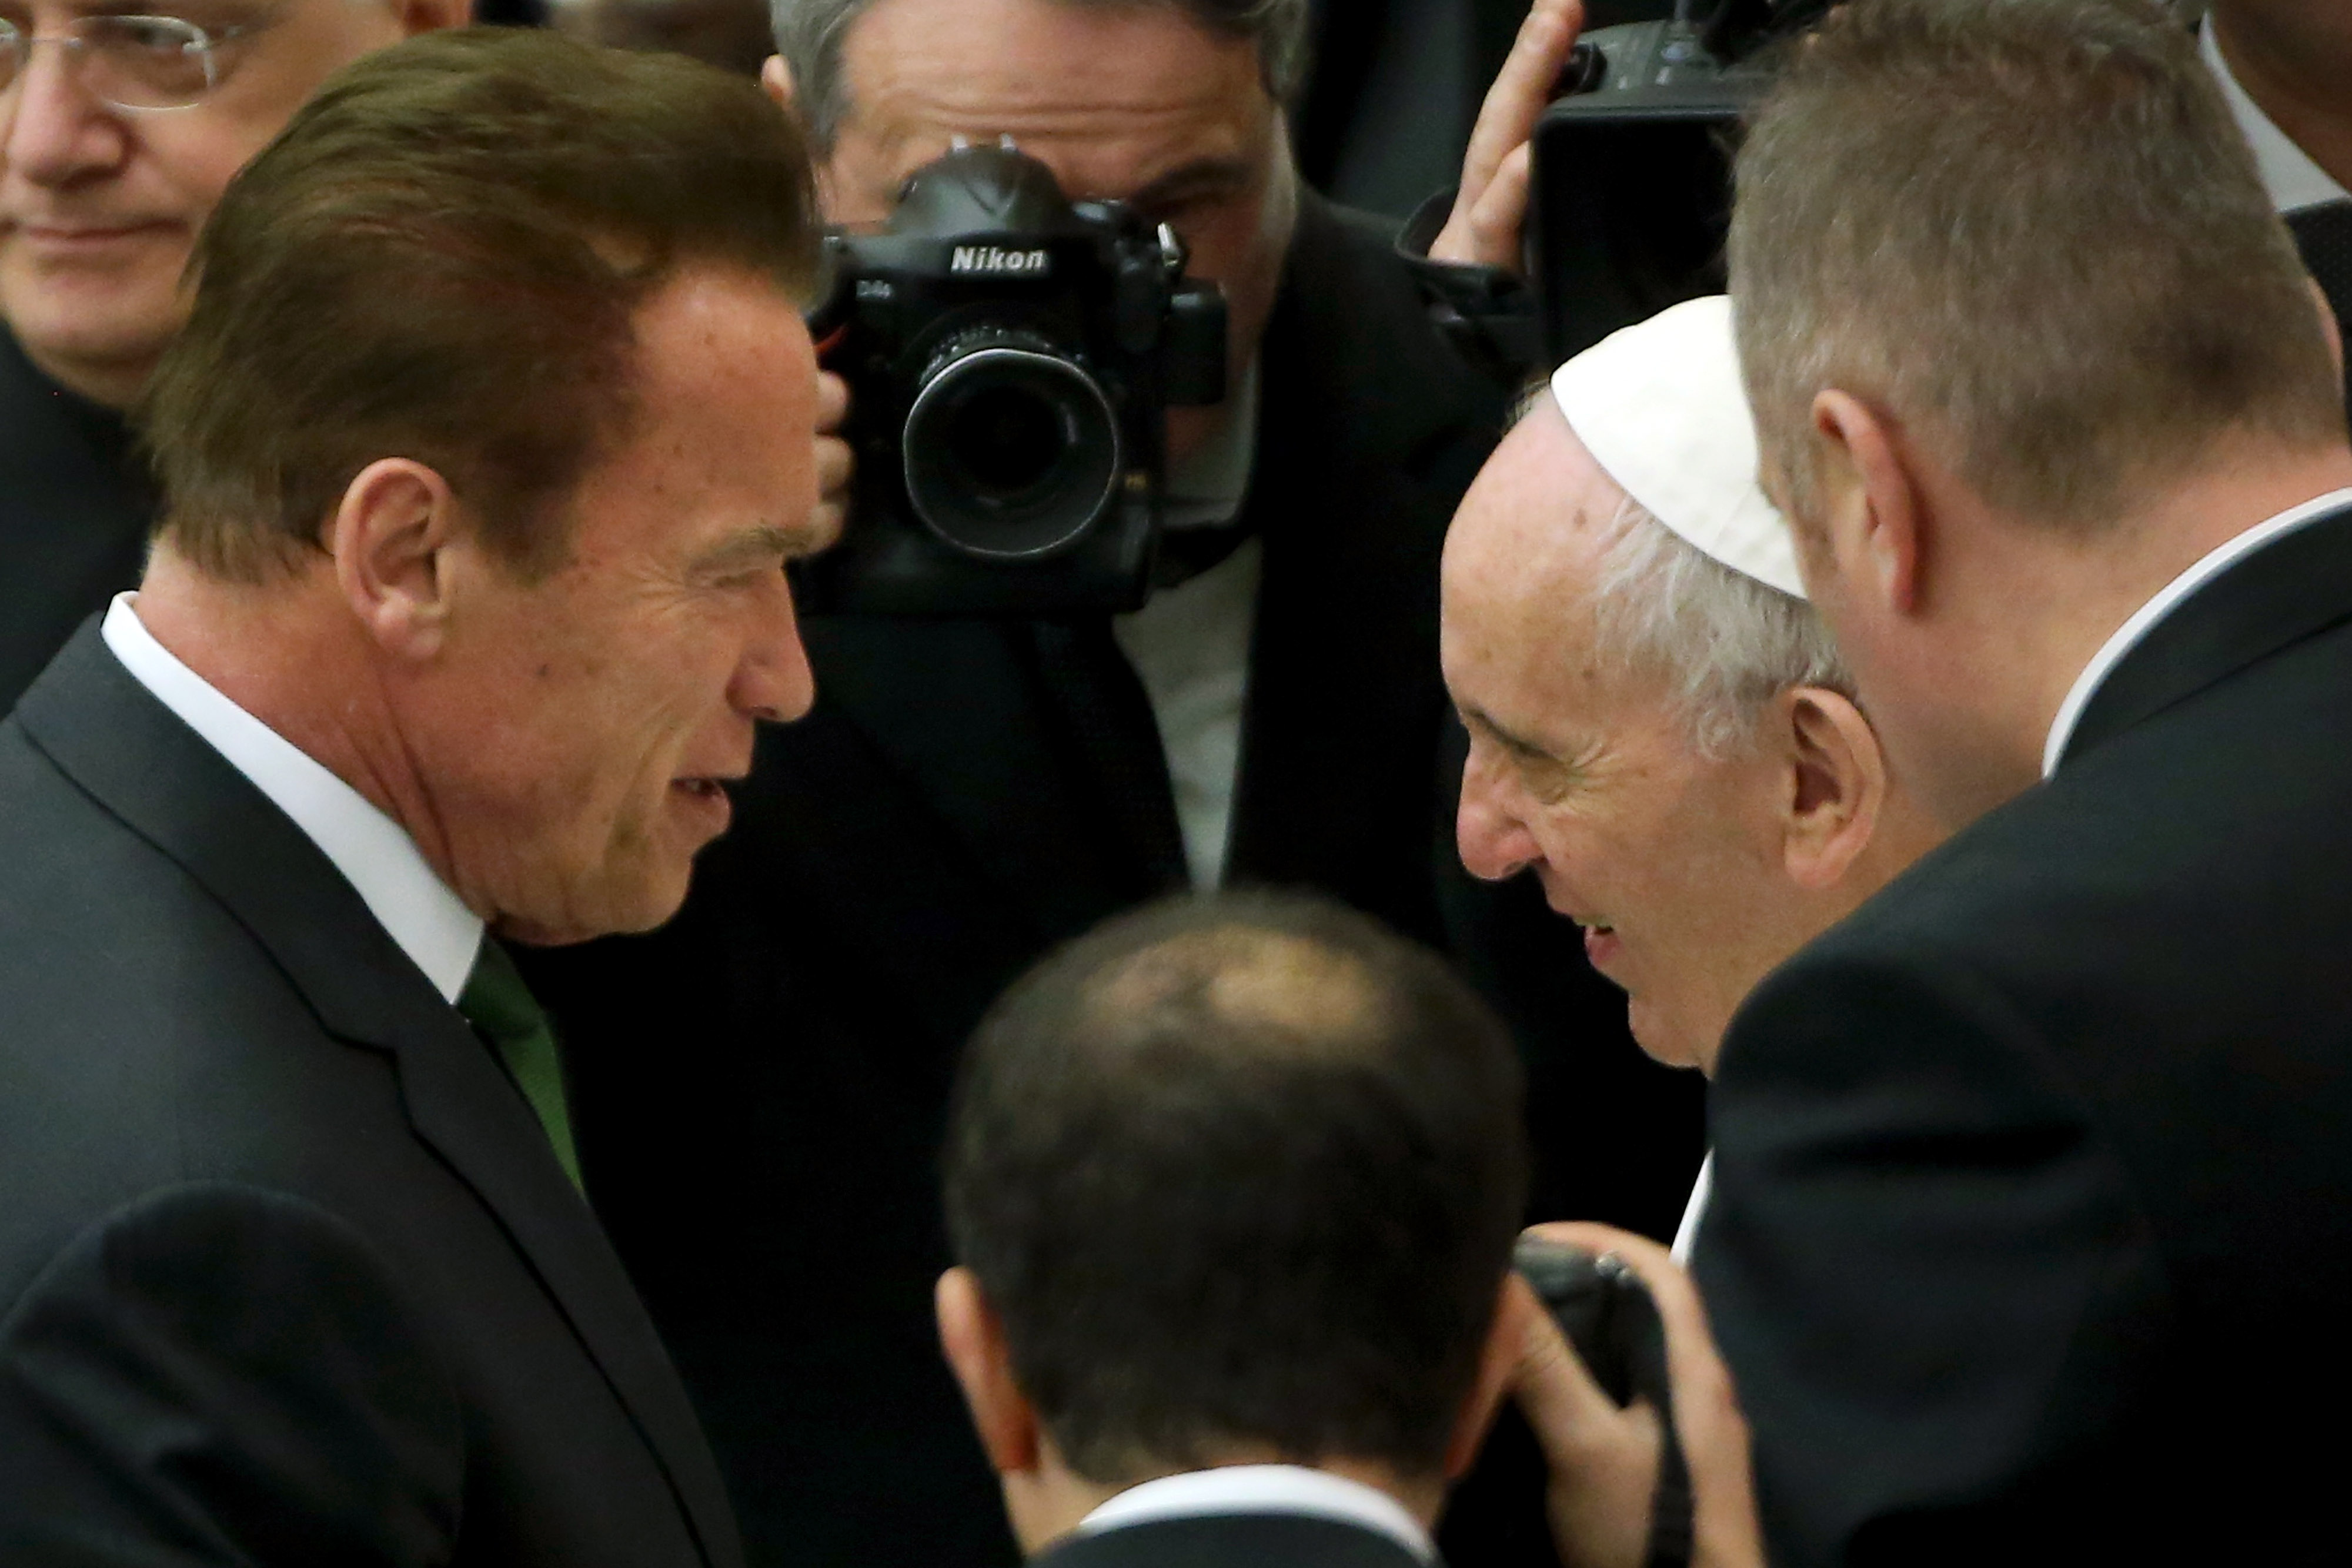 Pope Francis greets US actor and former governor of California Arnold Schwarzenegger during his weekly audience at the Paul VI Hall on Jan. 25, 2017 in Vatican City, Vatican. (Franco Origlia—Getty Images)